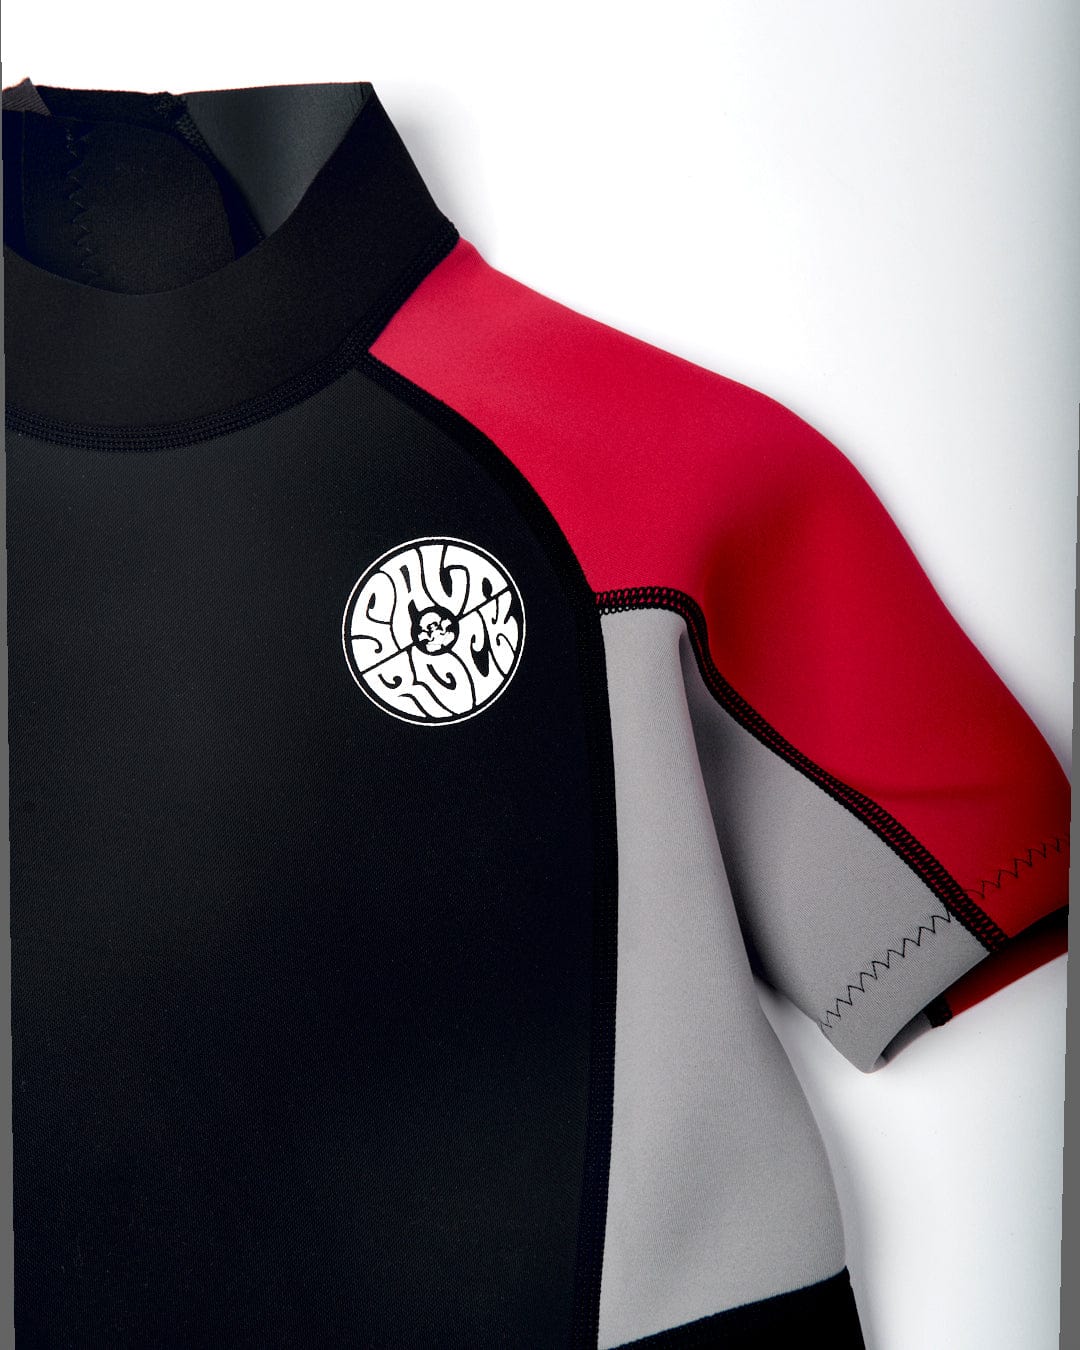 Close-up of a black neoprene Saltrock wetsuit with red and grey sleeve accents and a circular white logo on the chest.